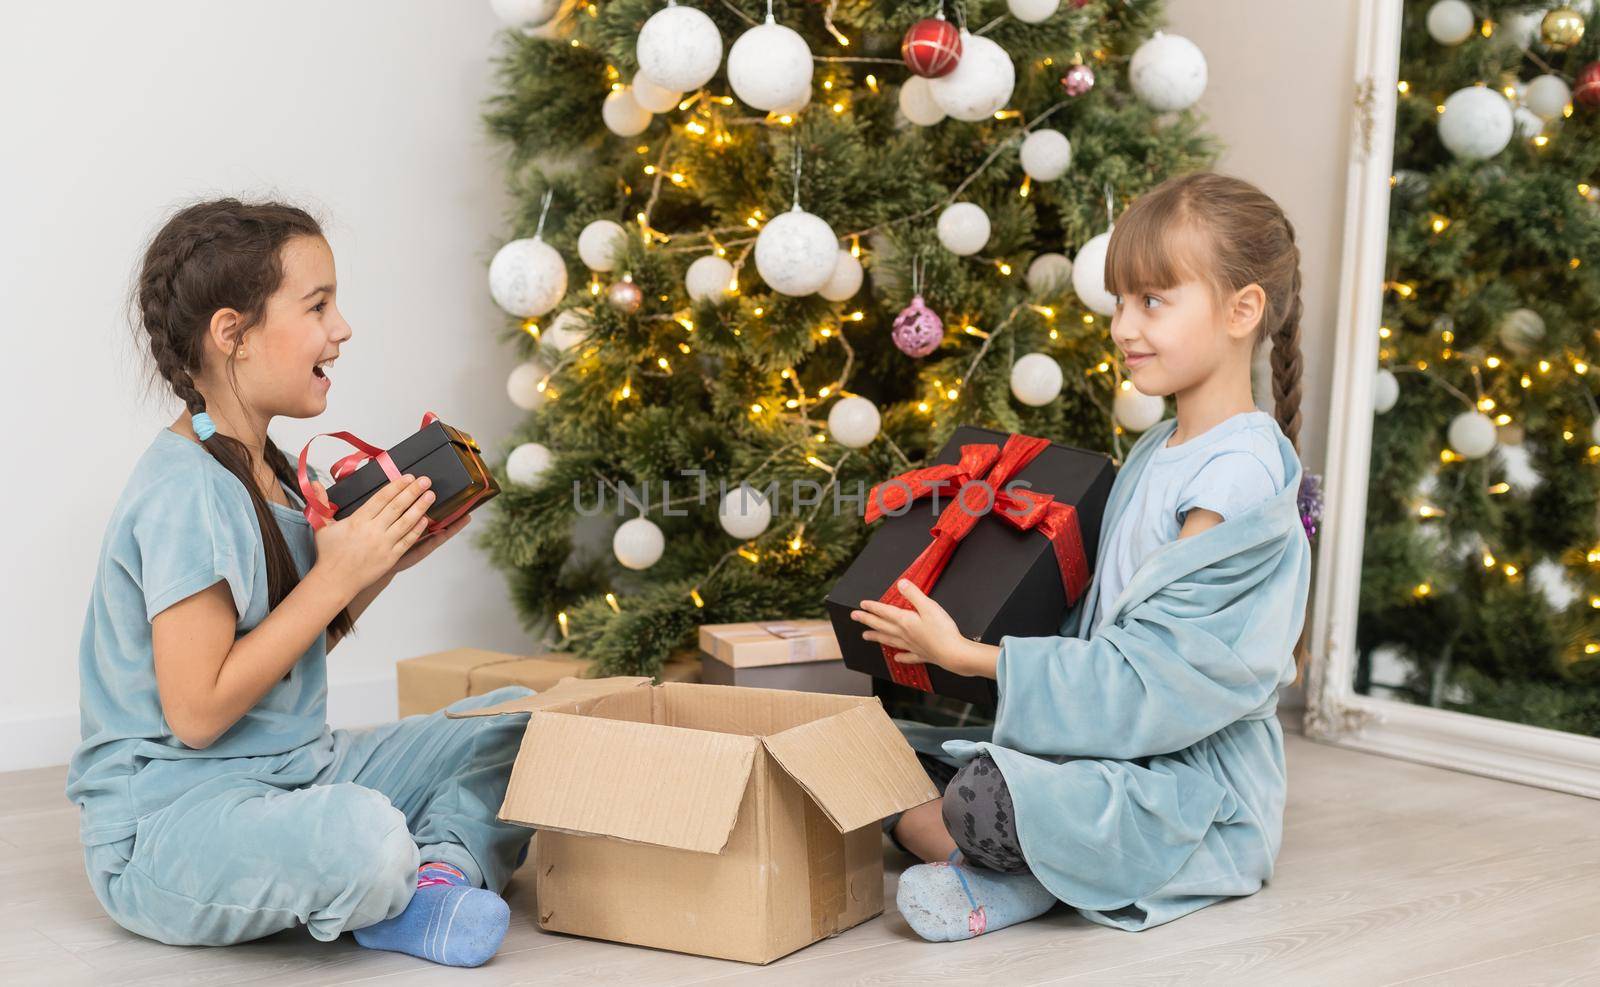 Two little girls open Christmas present under the Christmas tree by Andelov13